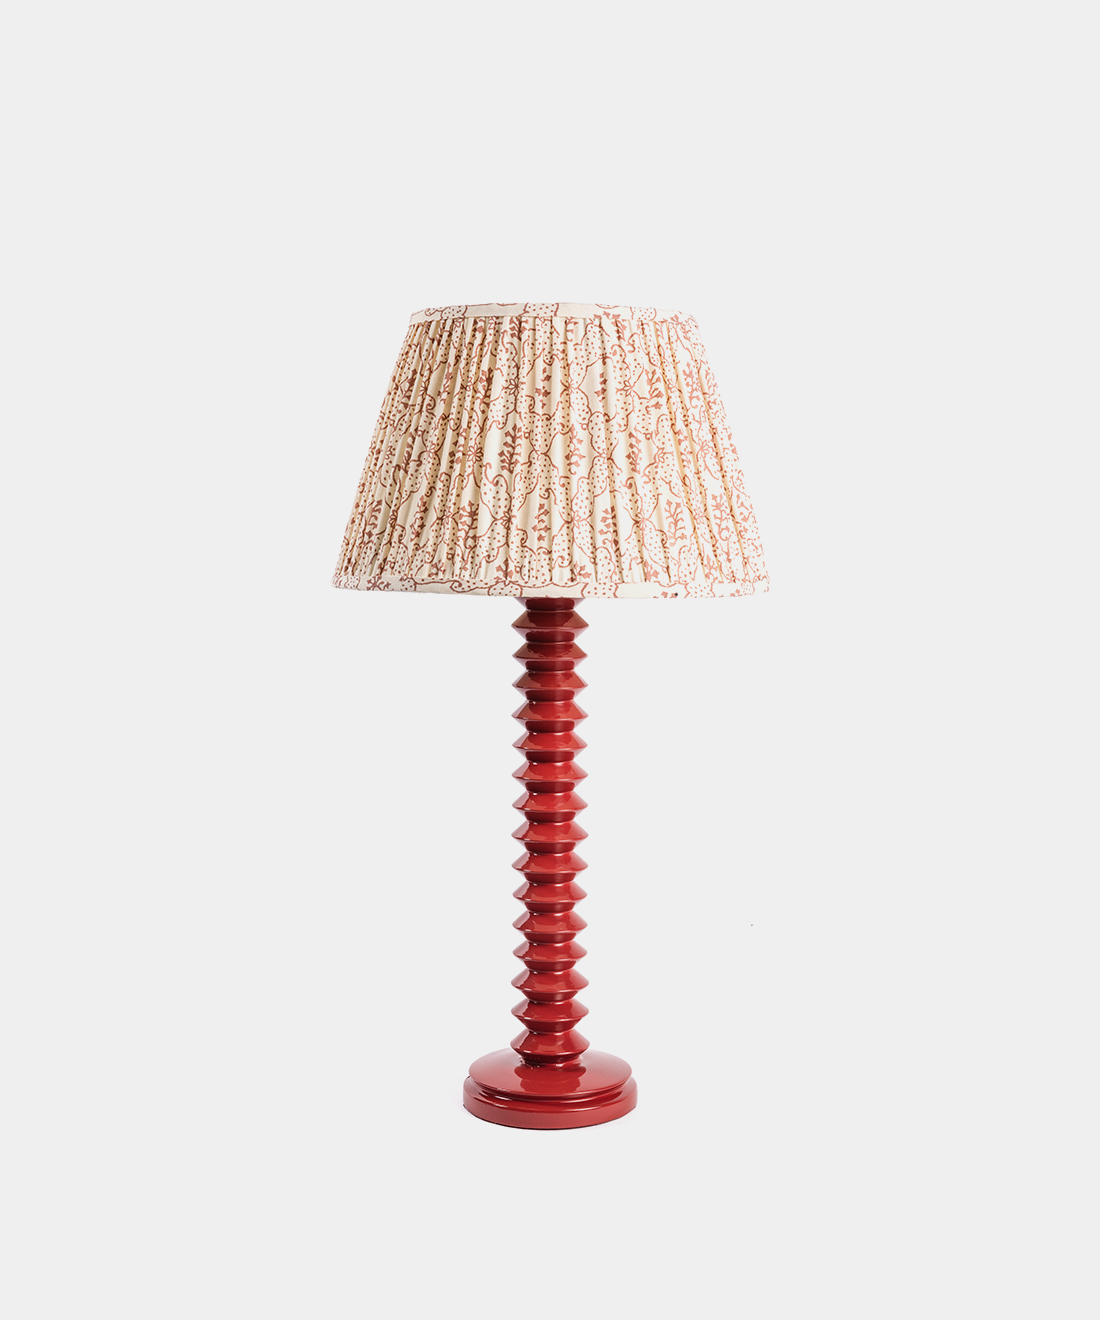 Aztec Lamp Base in Trilogy Red